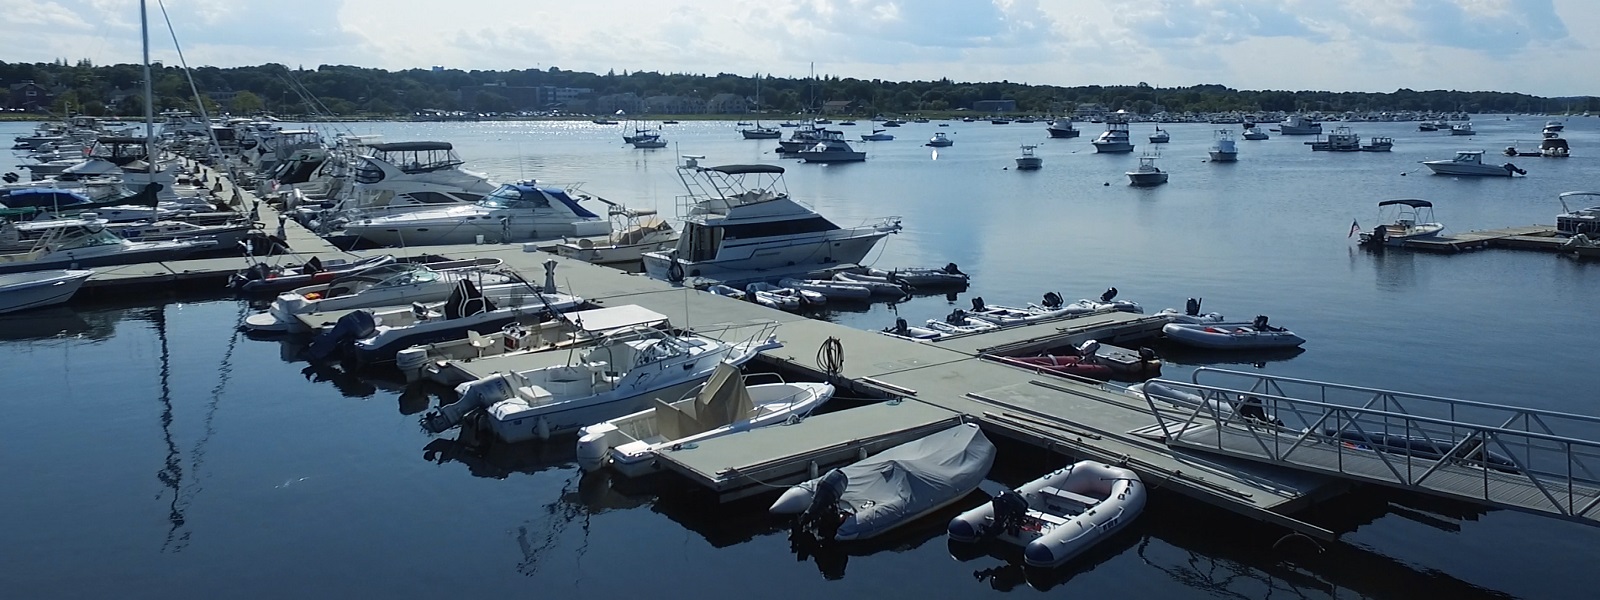 Cove Marina is just minutes from the mouth of the Merrimack River giving you more fun time on the water!